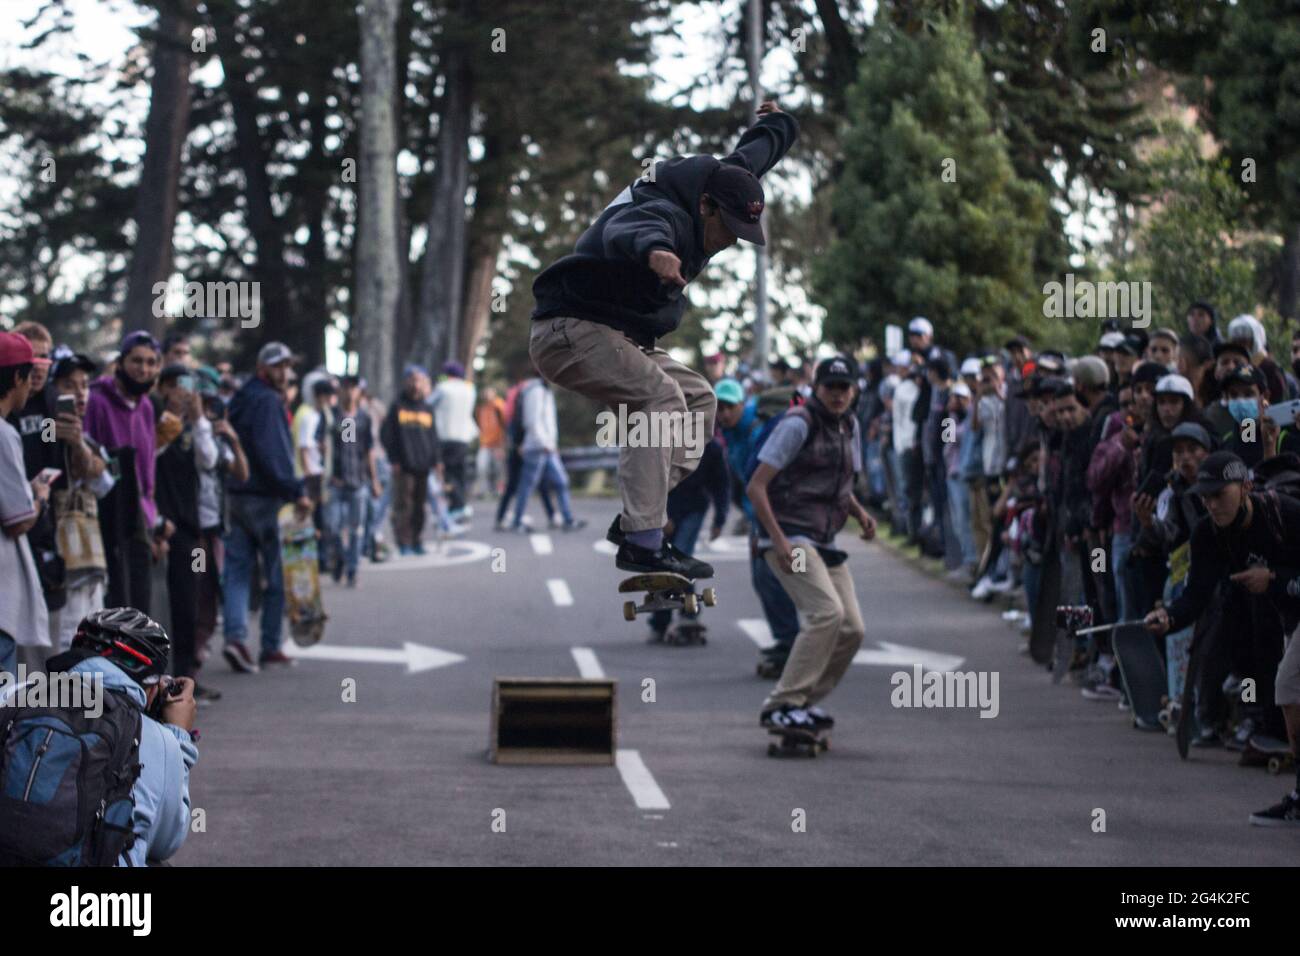 Skaters perform tricks on a ramp sitted on a main road during the  international World Skateboarding Day in Bogota, Colombia on June 21, 2021  Stock Photo - Alamy